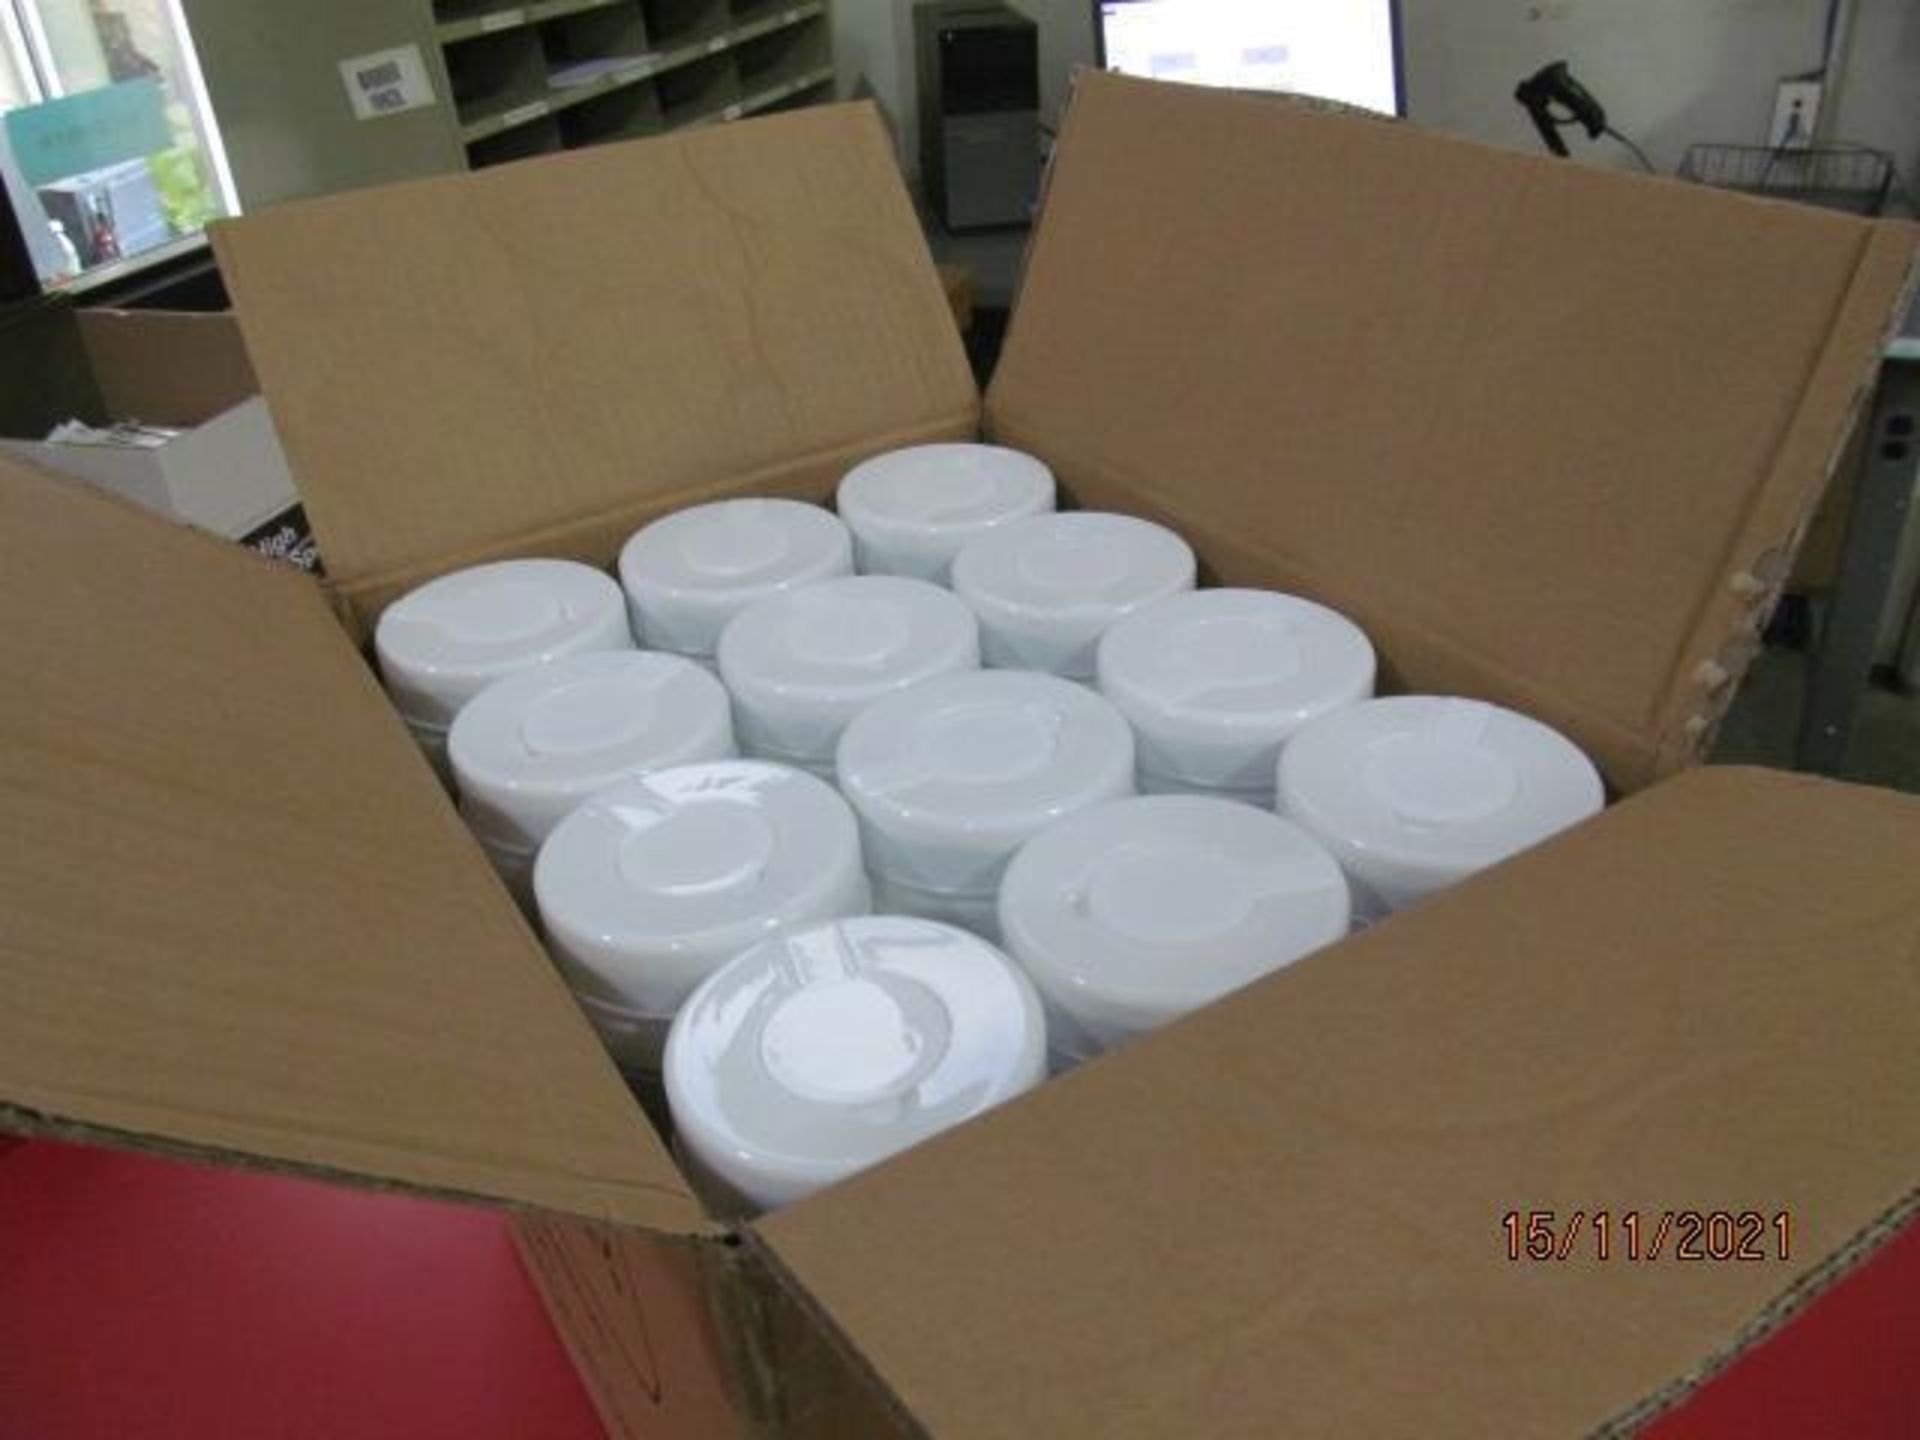 Lot of Waxman Kleen Freak Sanitizing Wipes consisting of 29,027 packages on 45 pallets. Each package - Image 5 of 11